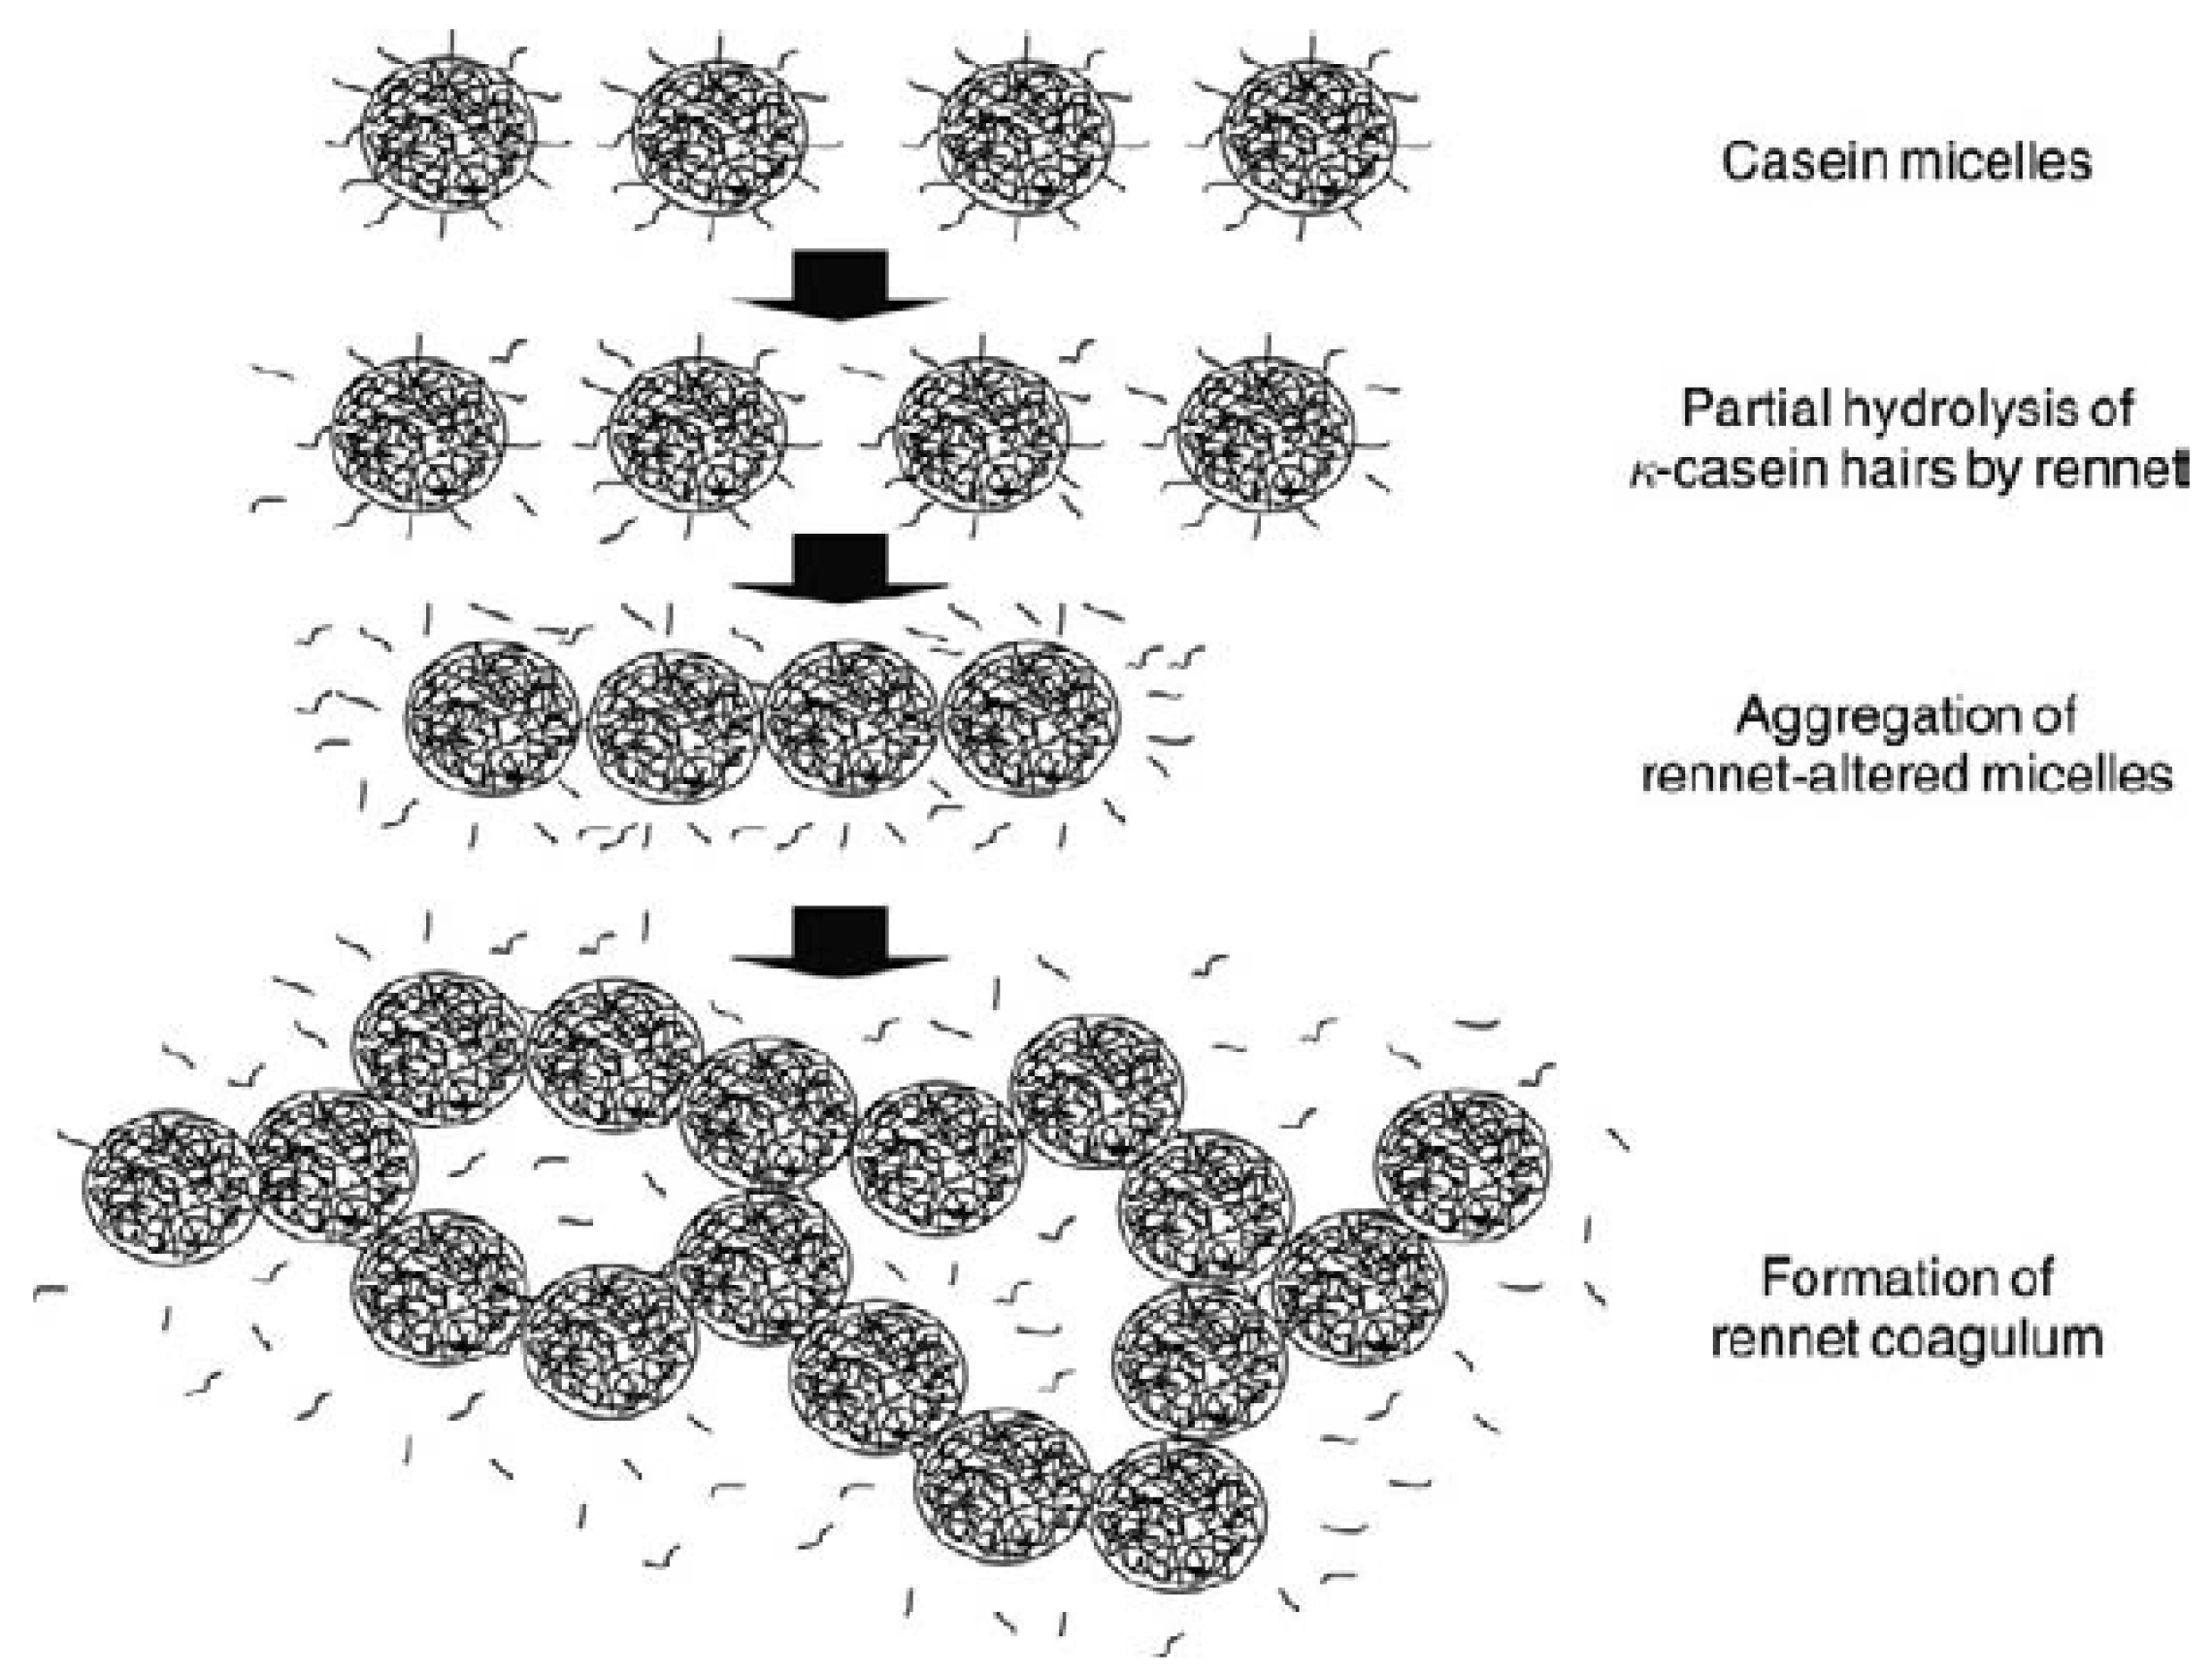 Foods | Free Full-Text | Rennet-Induced Casein Micelle Aggregation Models:  A Review | HTML